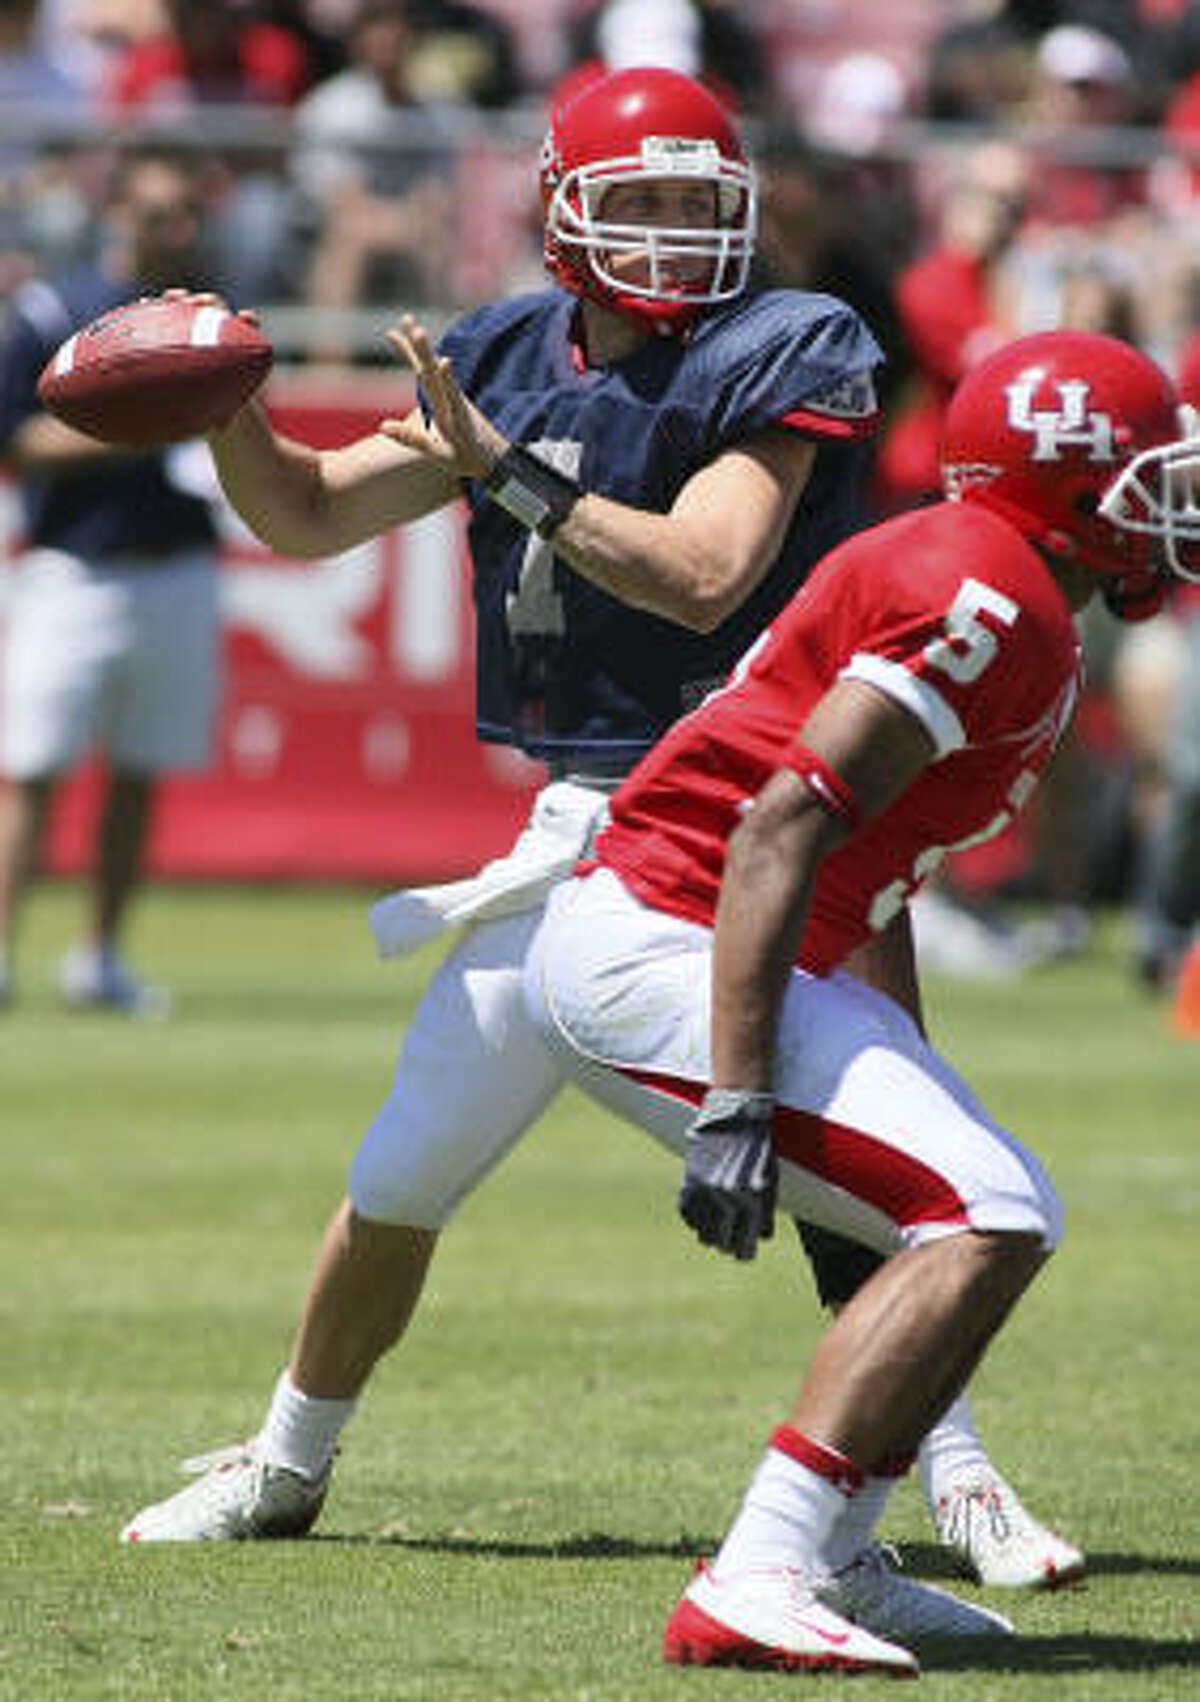 Houston QB Case Keenum praised the Cougars' defense Saturday but still threw for two touchdowns and had no interceptions.